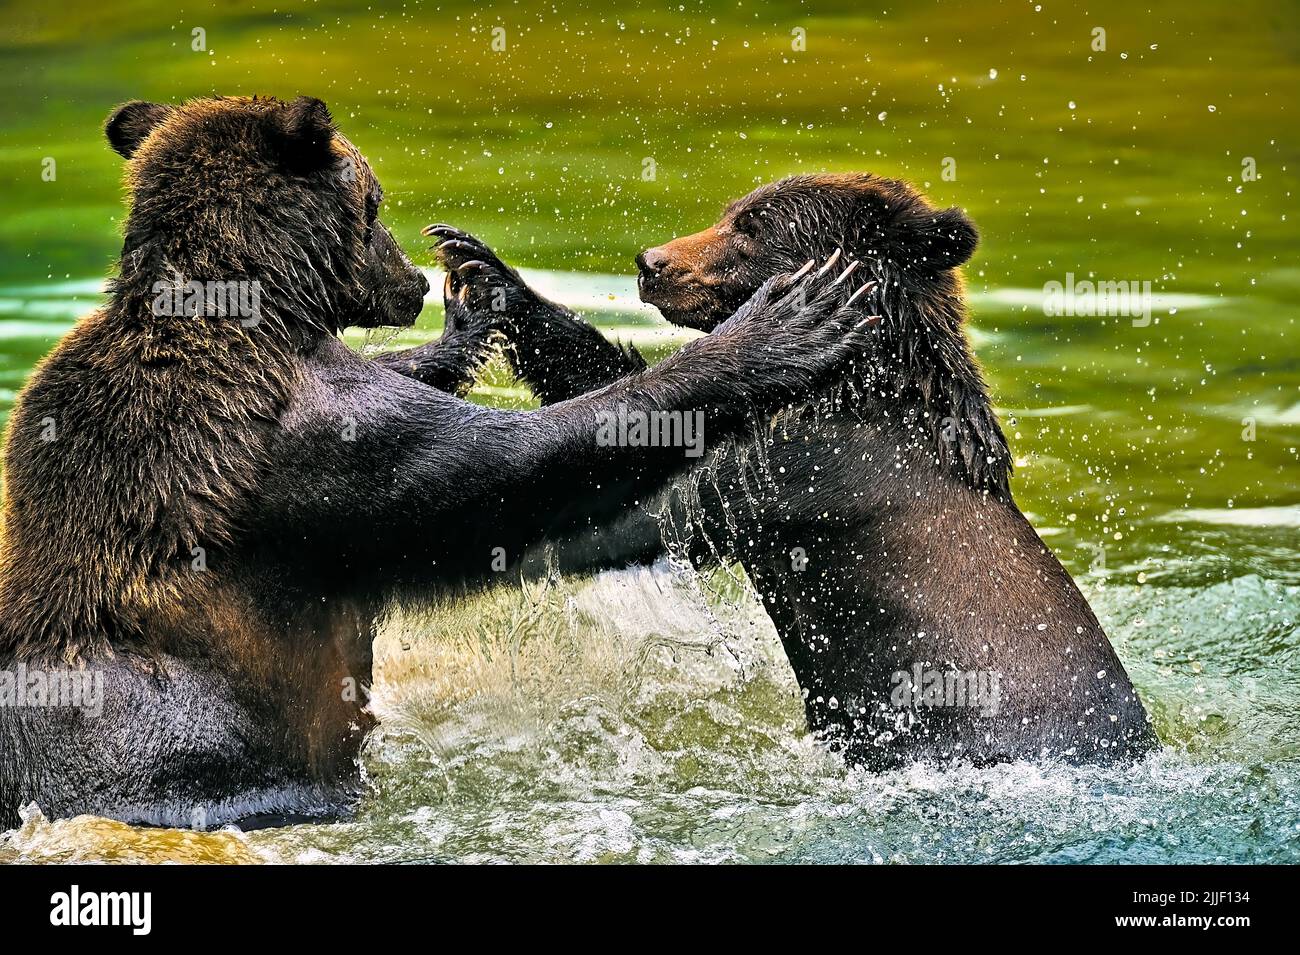 Mother and cub grizzly bears aggressively playing in a quiet lagoon in the Tongass National Forest in Alaska, U.S.A. Stock Photo